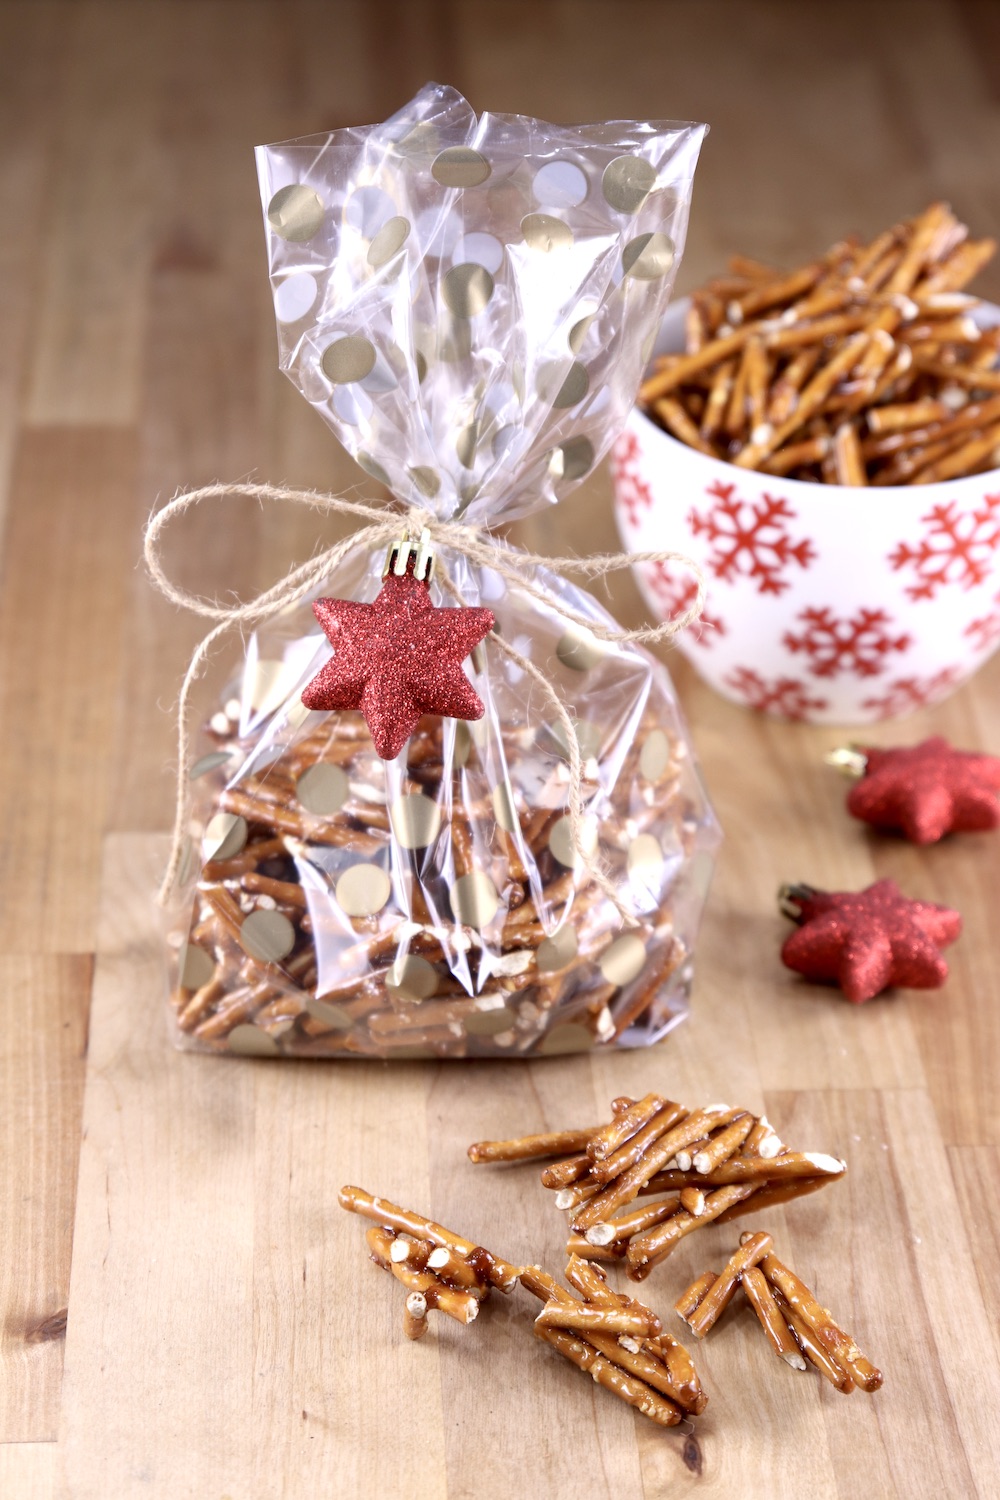 Cellophane bag of candied pretzels tied with string and a red star ornament. A few pretzels on the counter